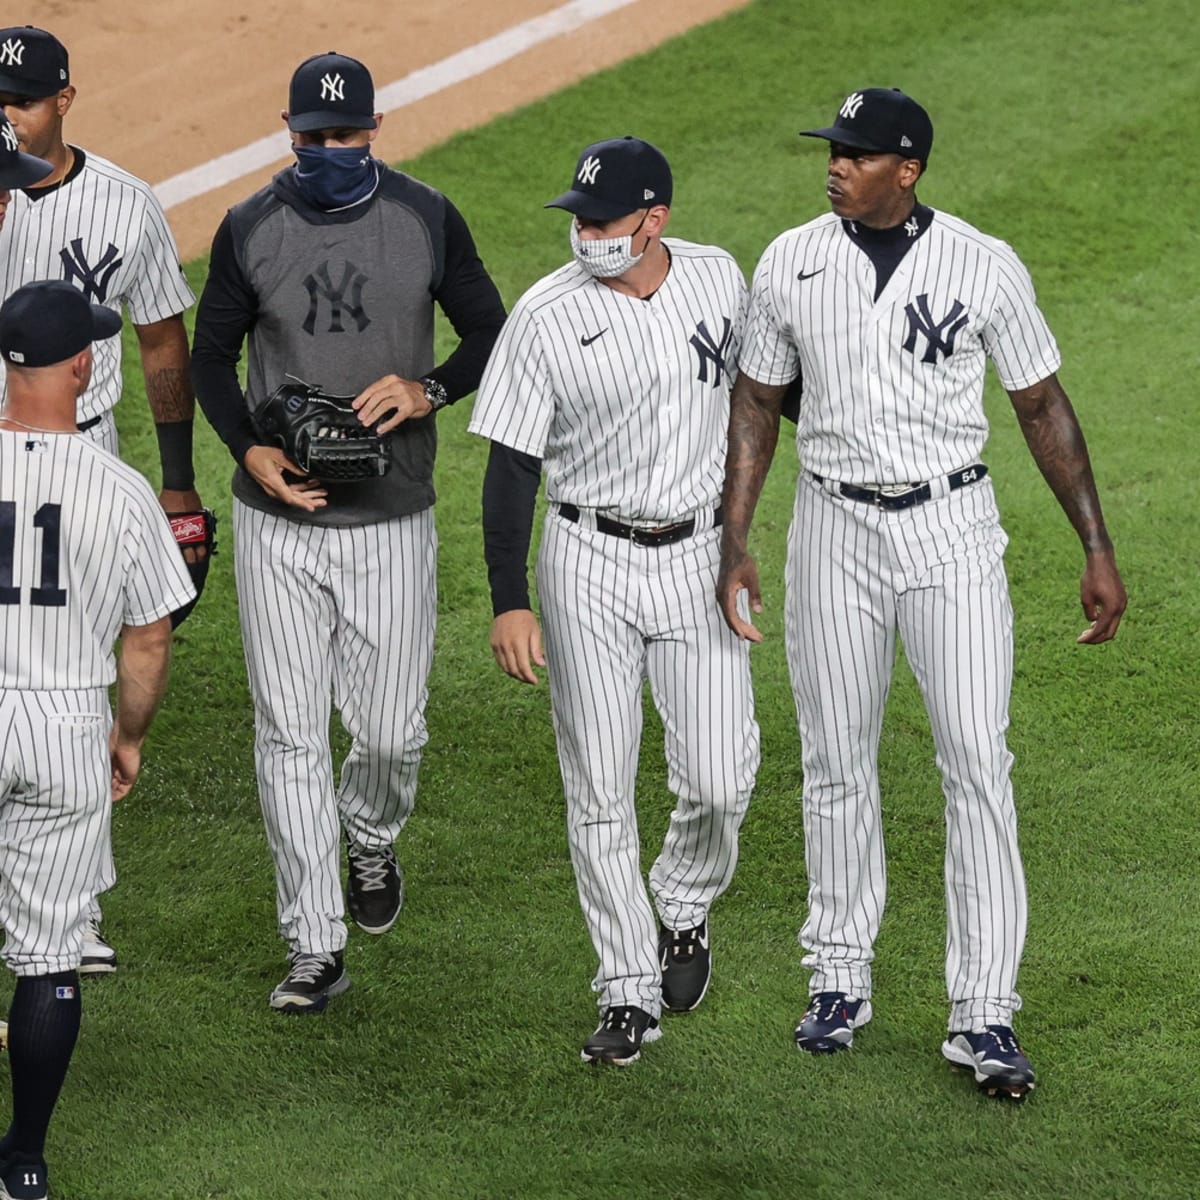 Aroldis Chapman pitch to Brosseau: Yankees pitcher suspended 3 games